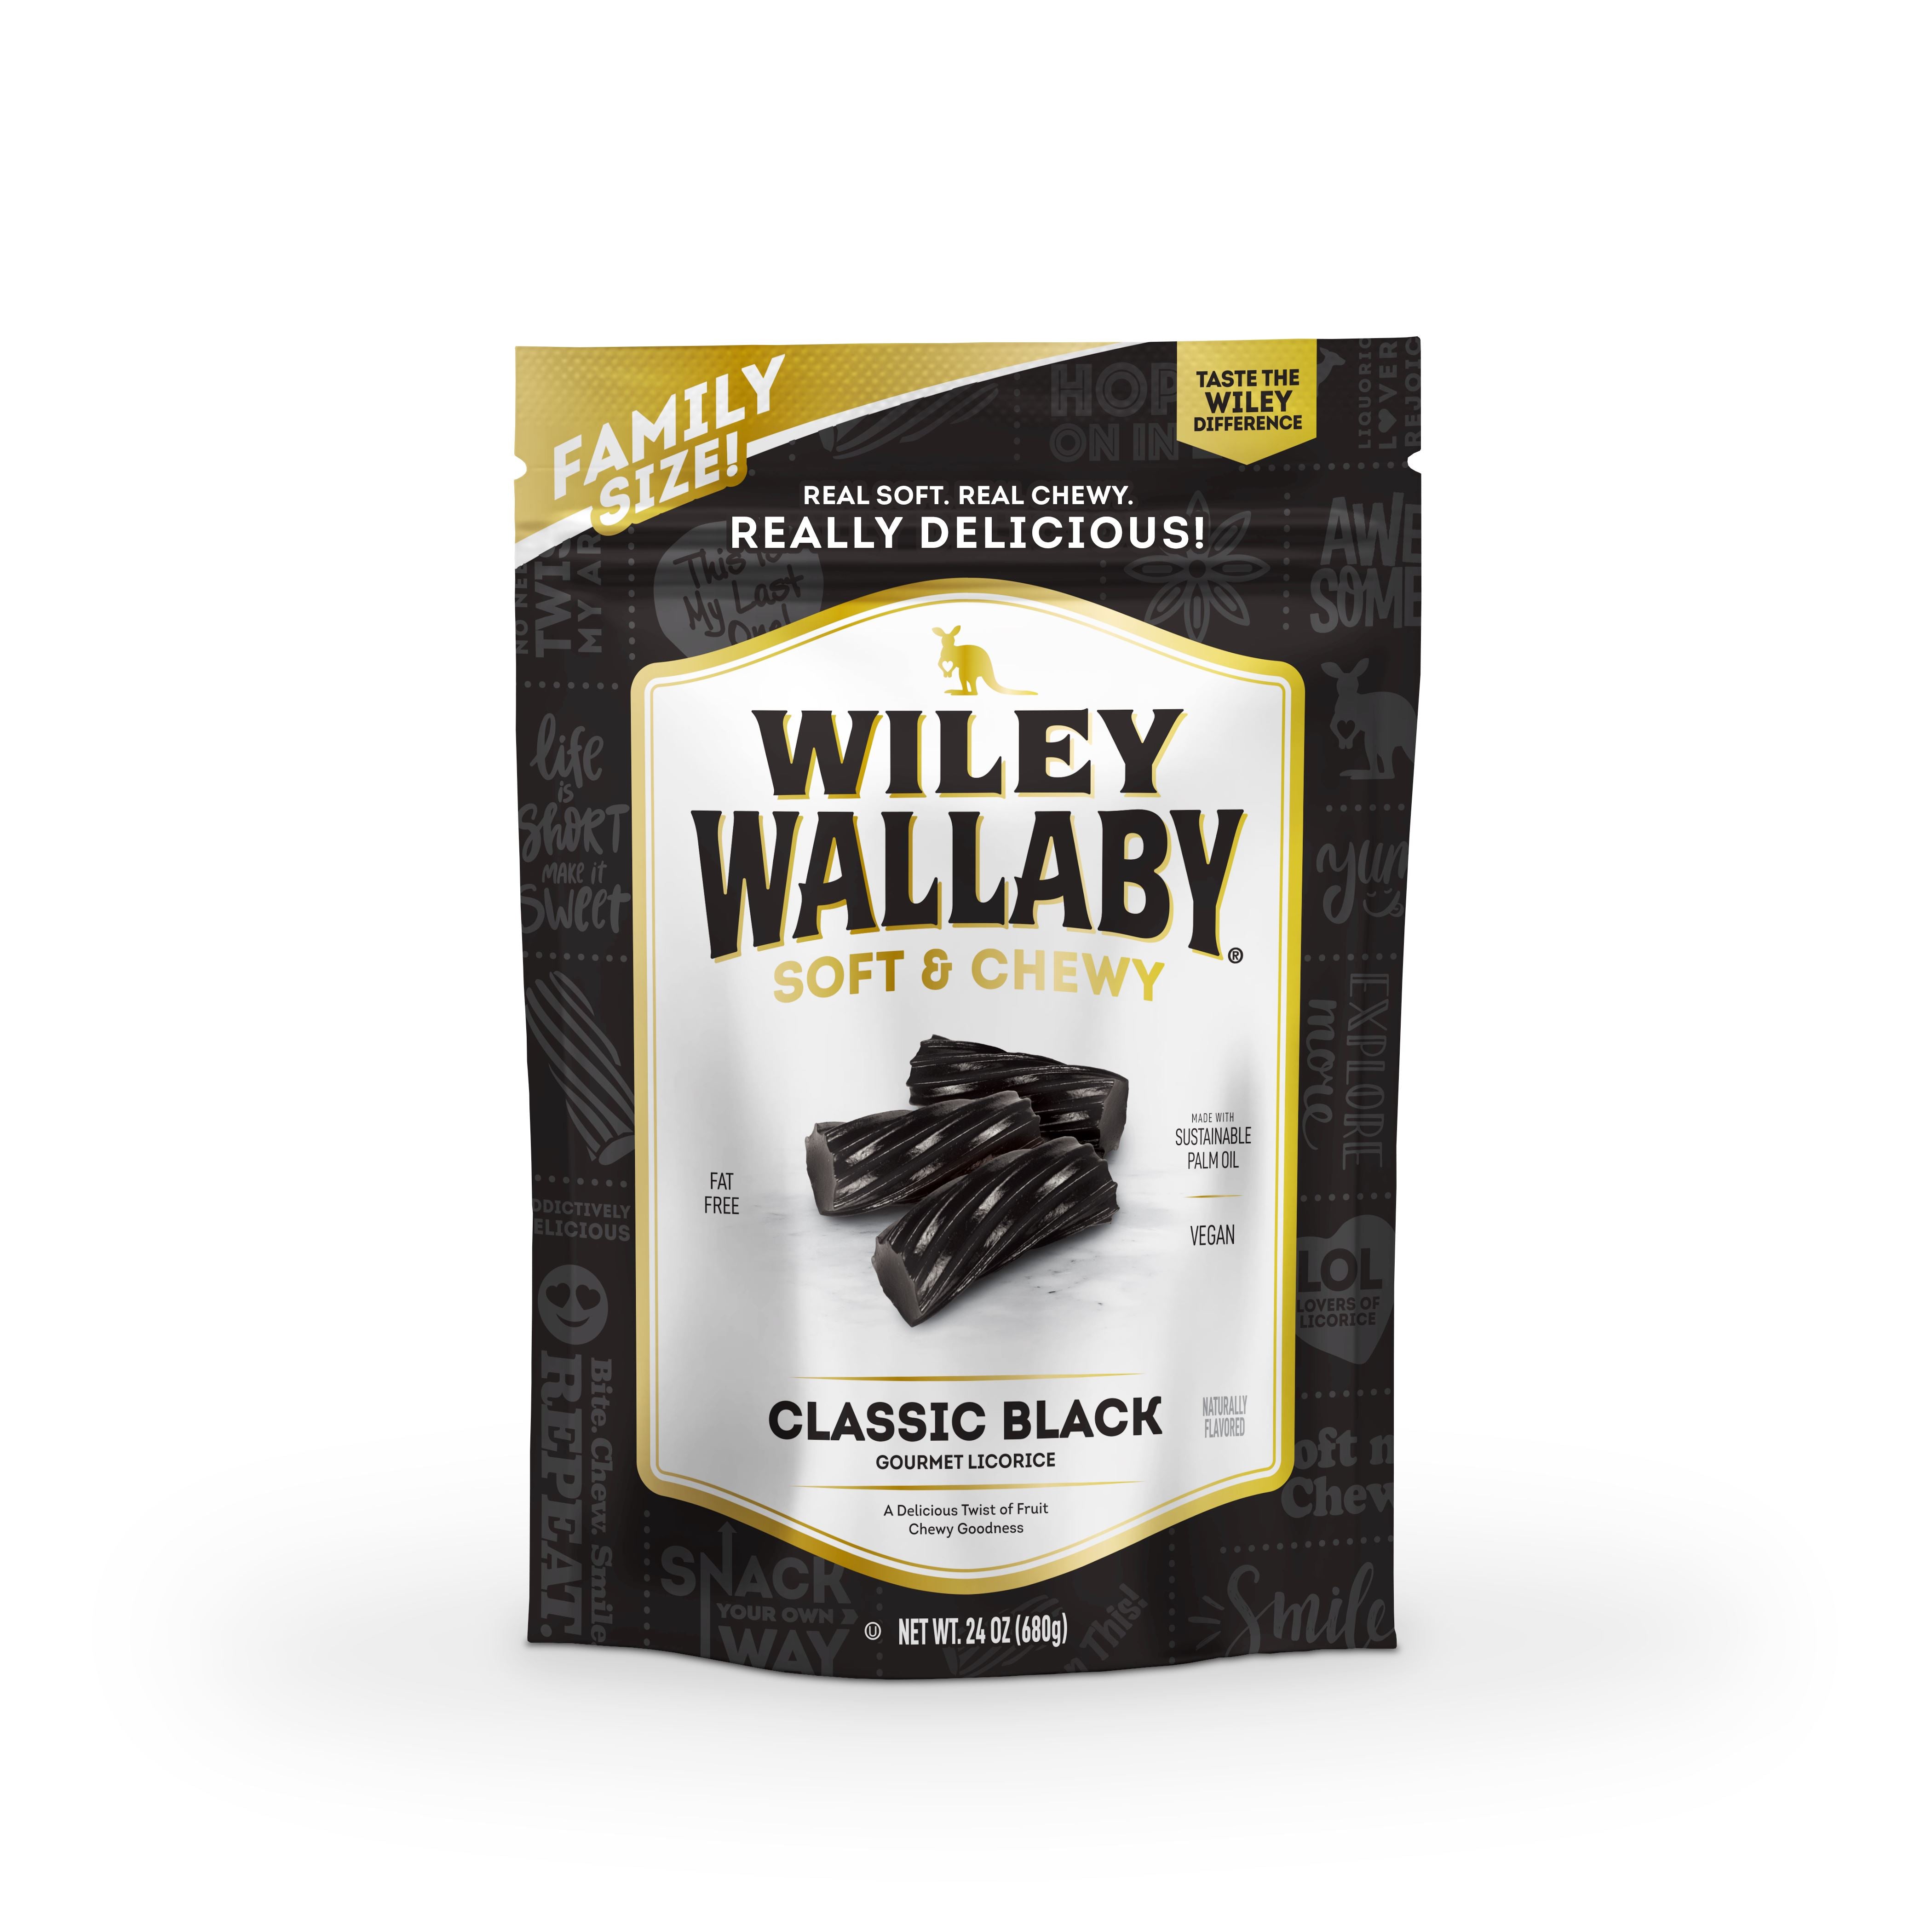 Wiley Wallaby Licorice Wiley Wallaby Classic Black 24 Ounce 